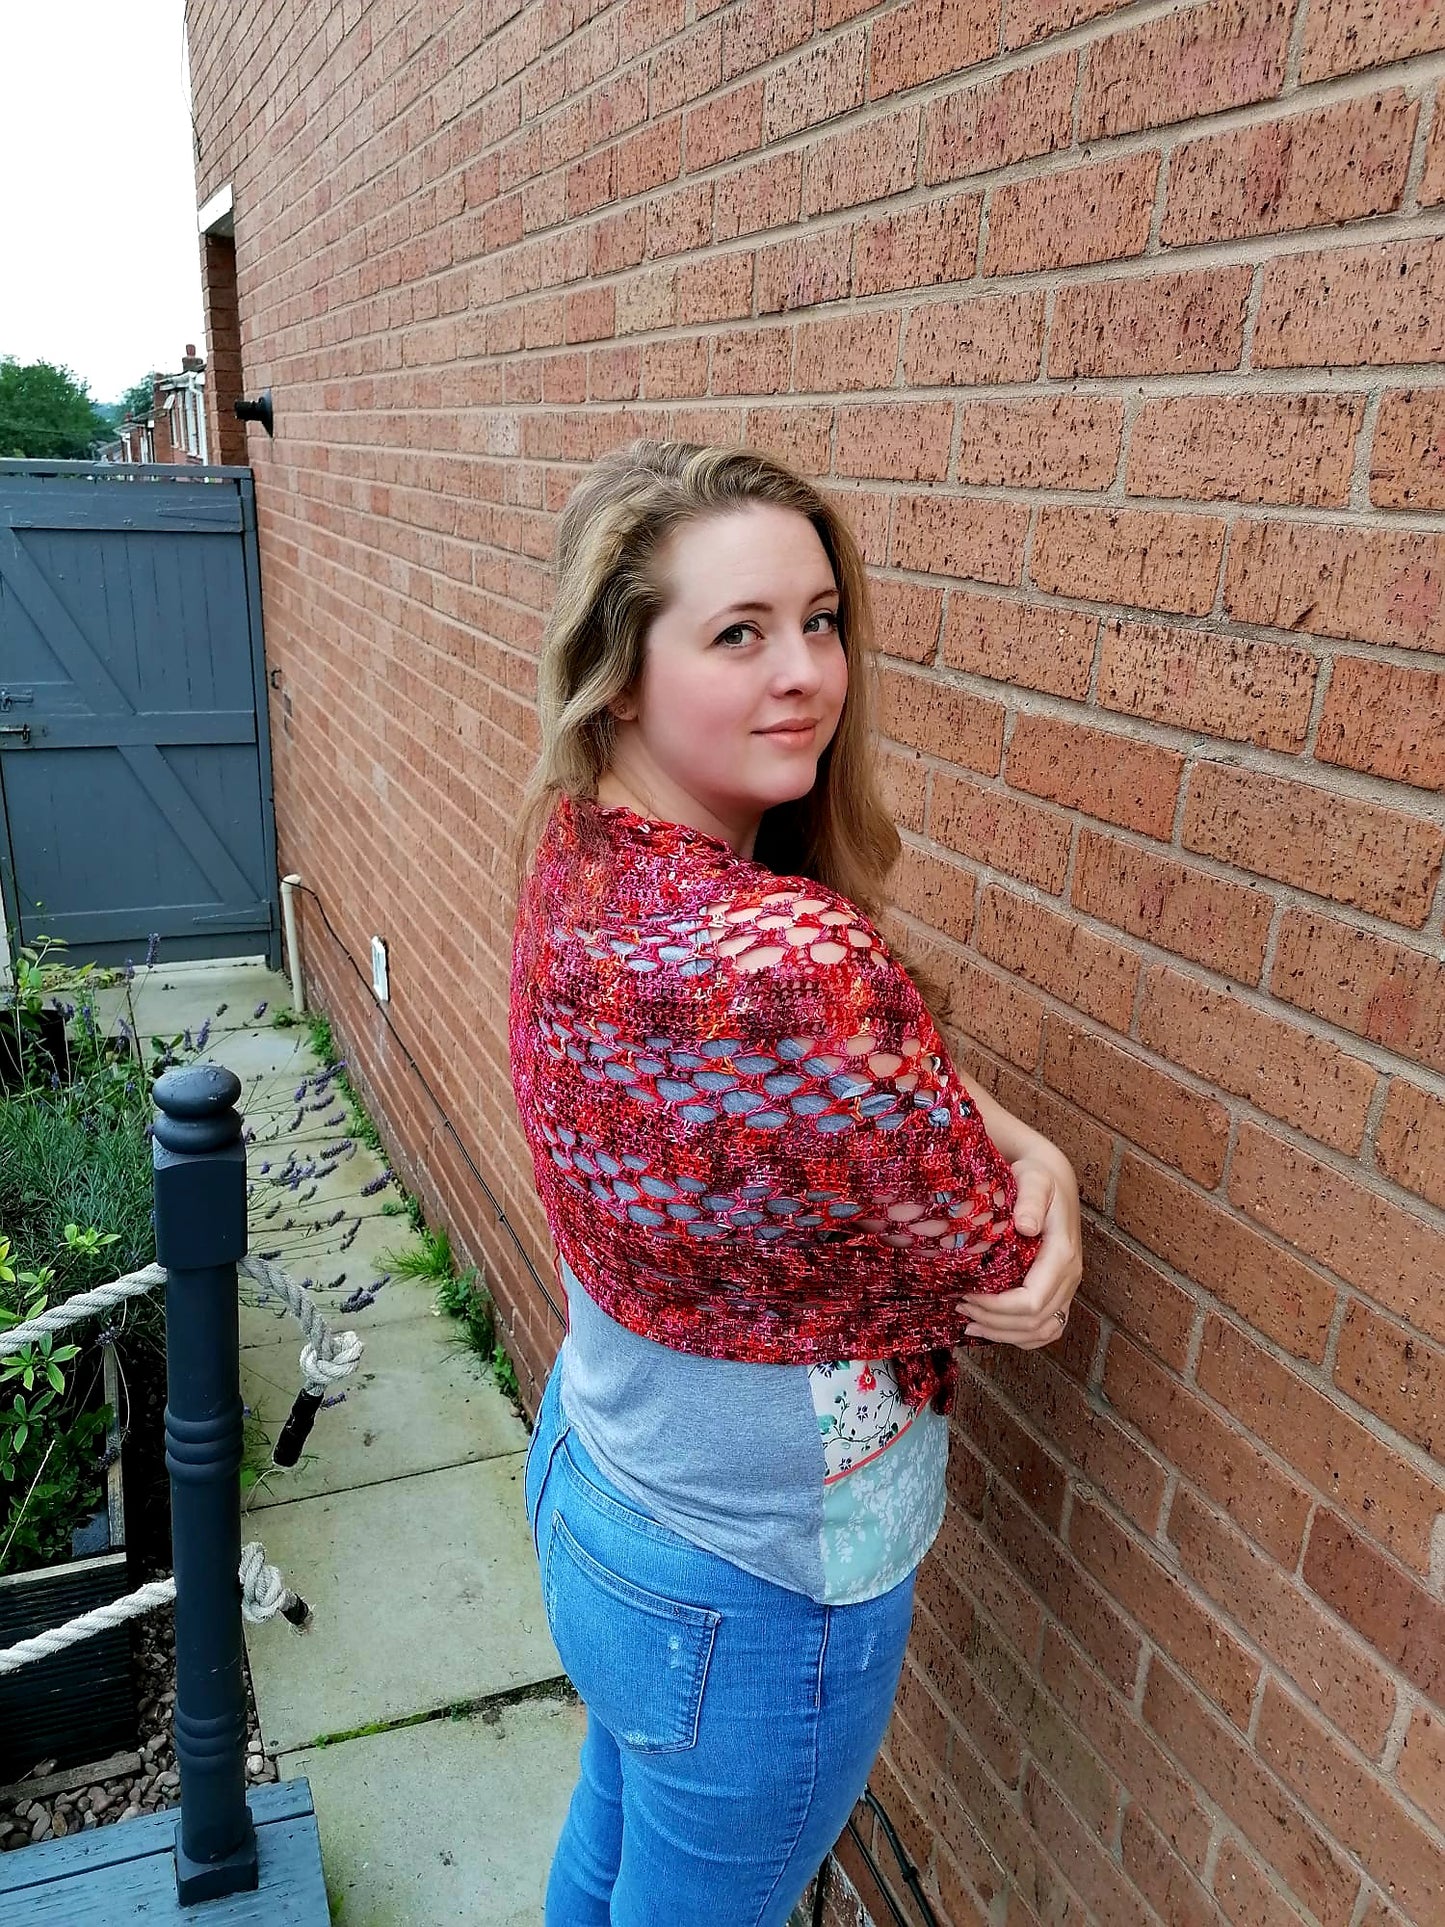 A woman is tanding against a wall wearing a red lace crochet wrap across her shoulders. She has her arms folded and is looking over her shoulder. The crochet shawl is wrapped tightly. 